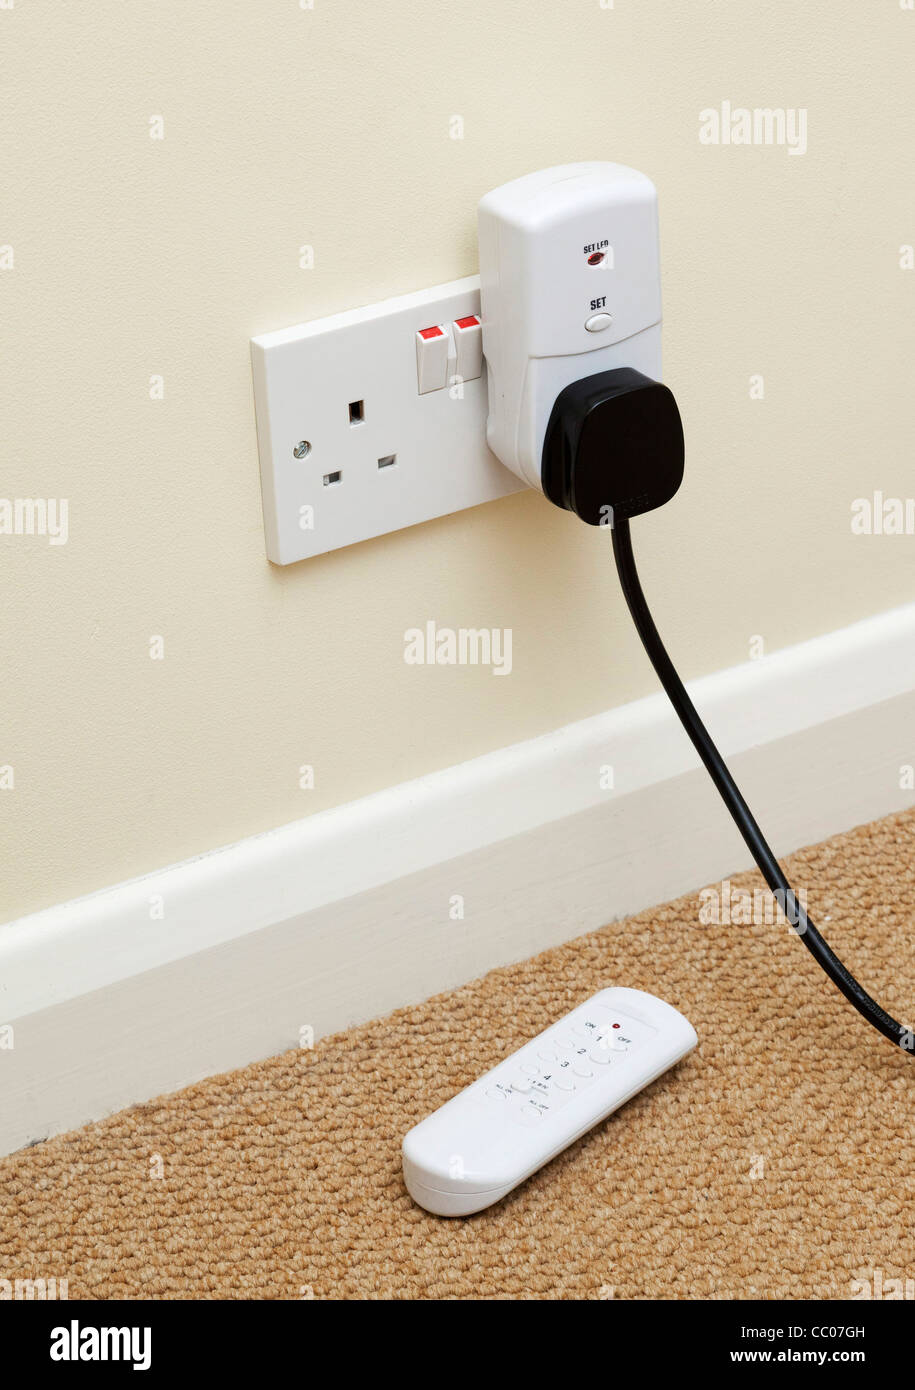 remote controller for controlling electrical appliance plugged into mains wall socket Stock Photo